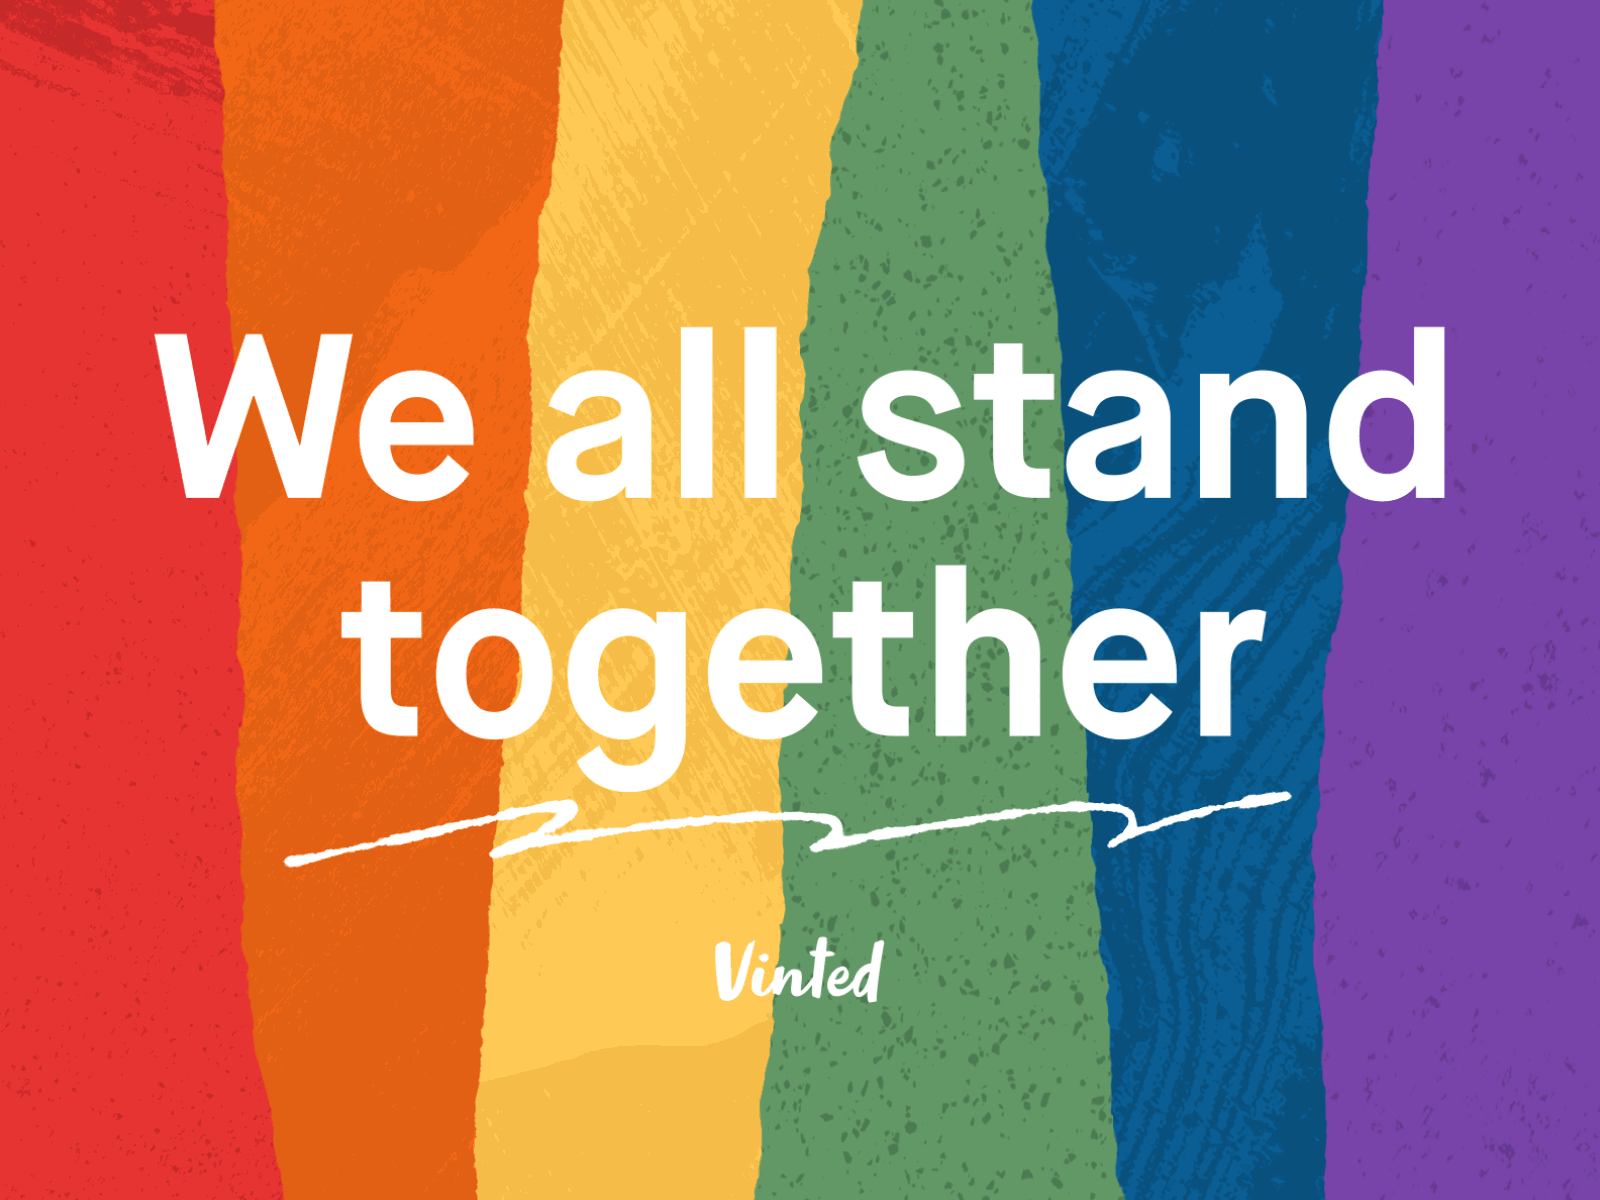 Together we stand!